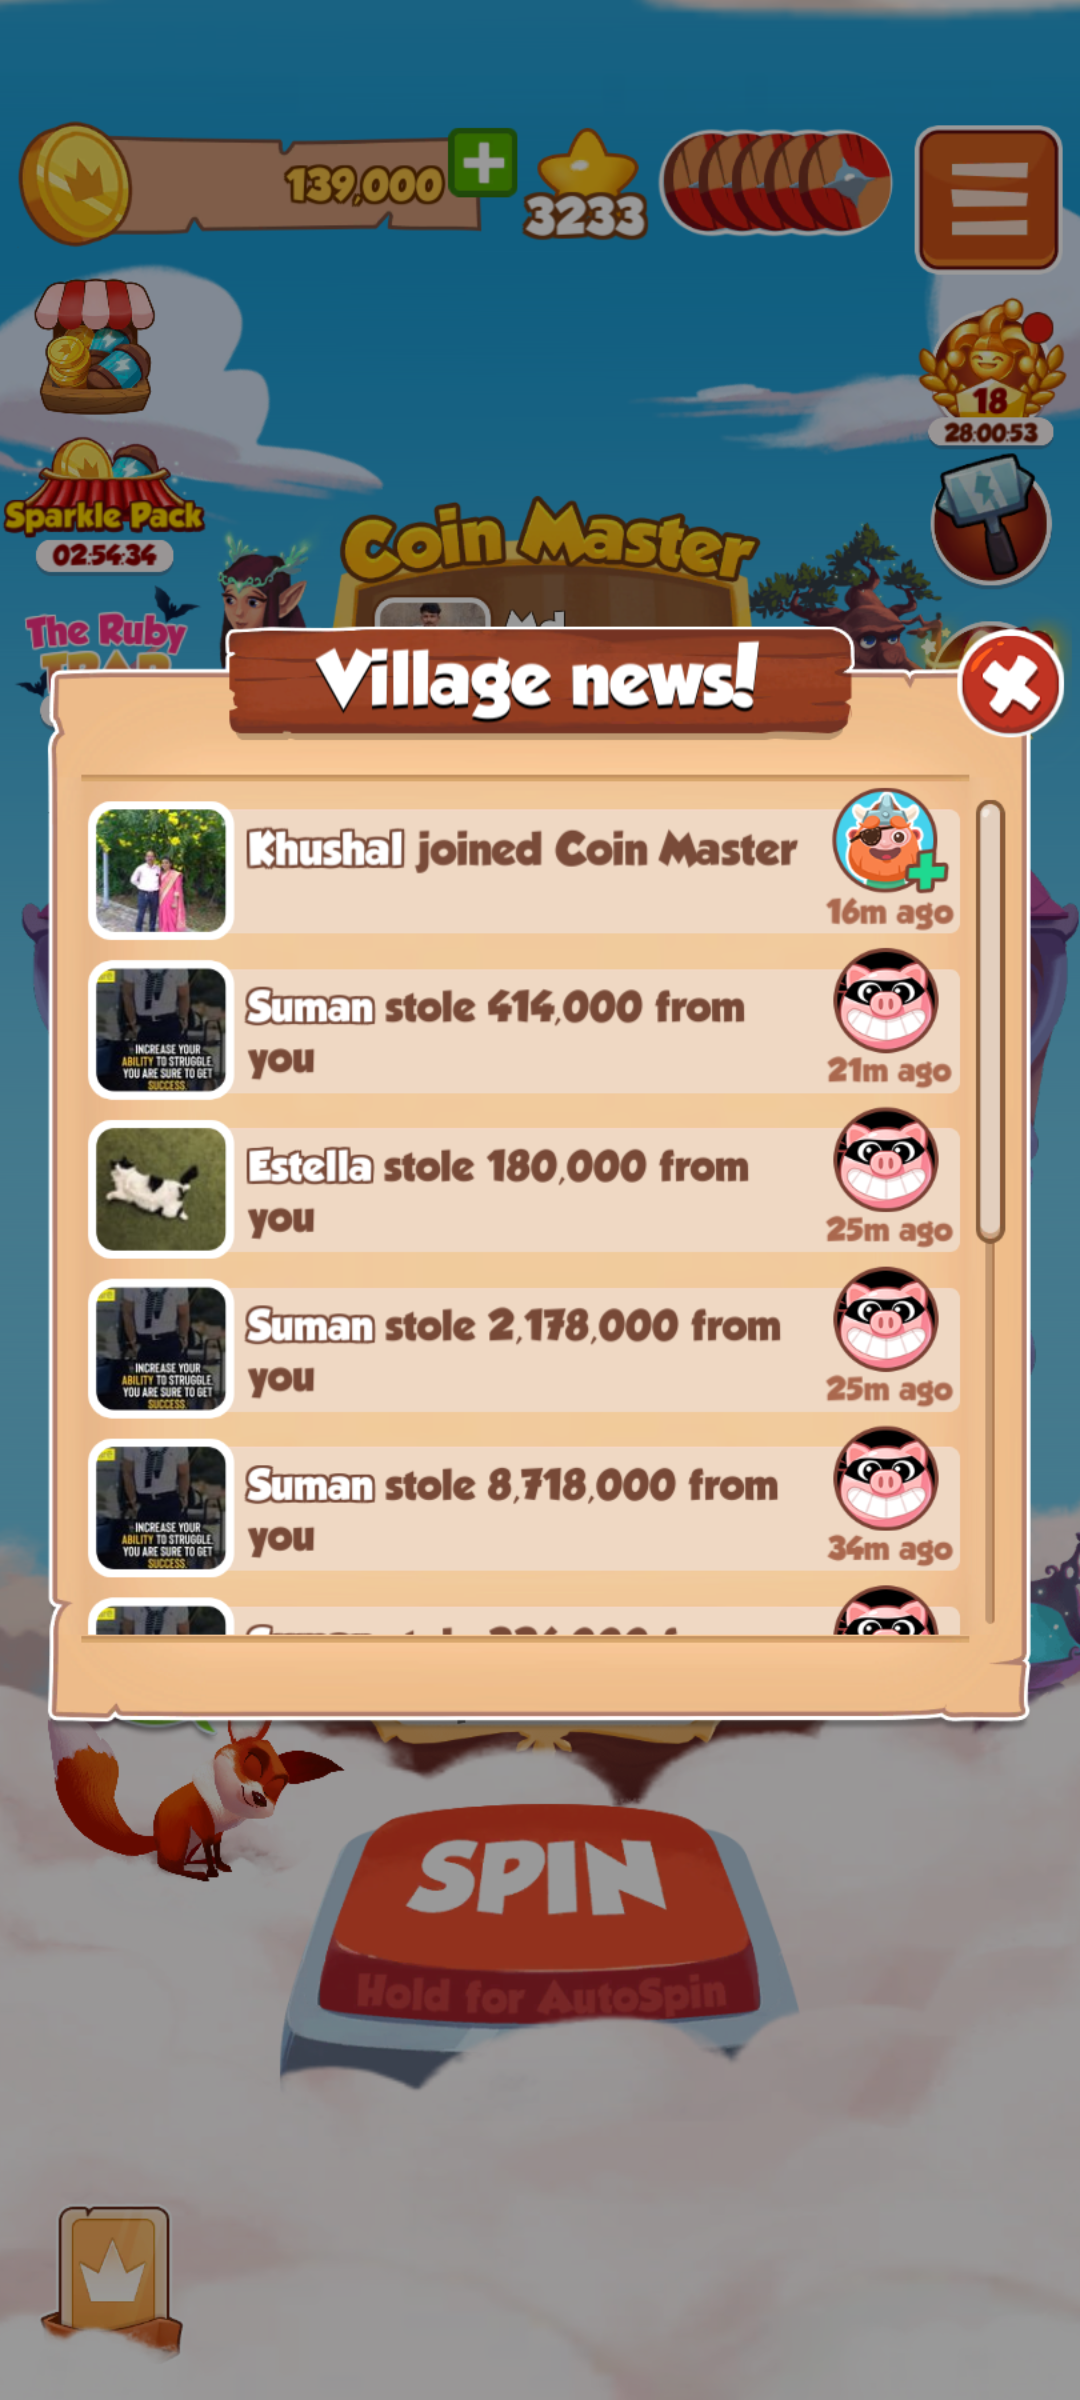 Coin Master complaint Spins not received by joined my friend